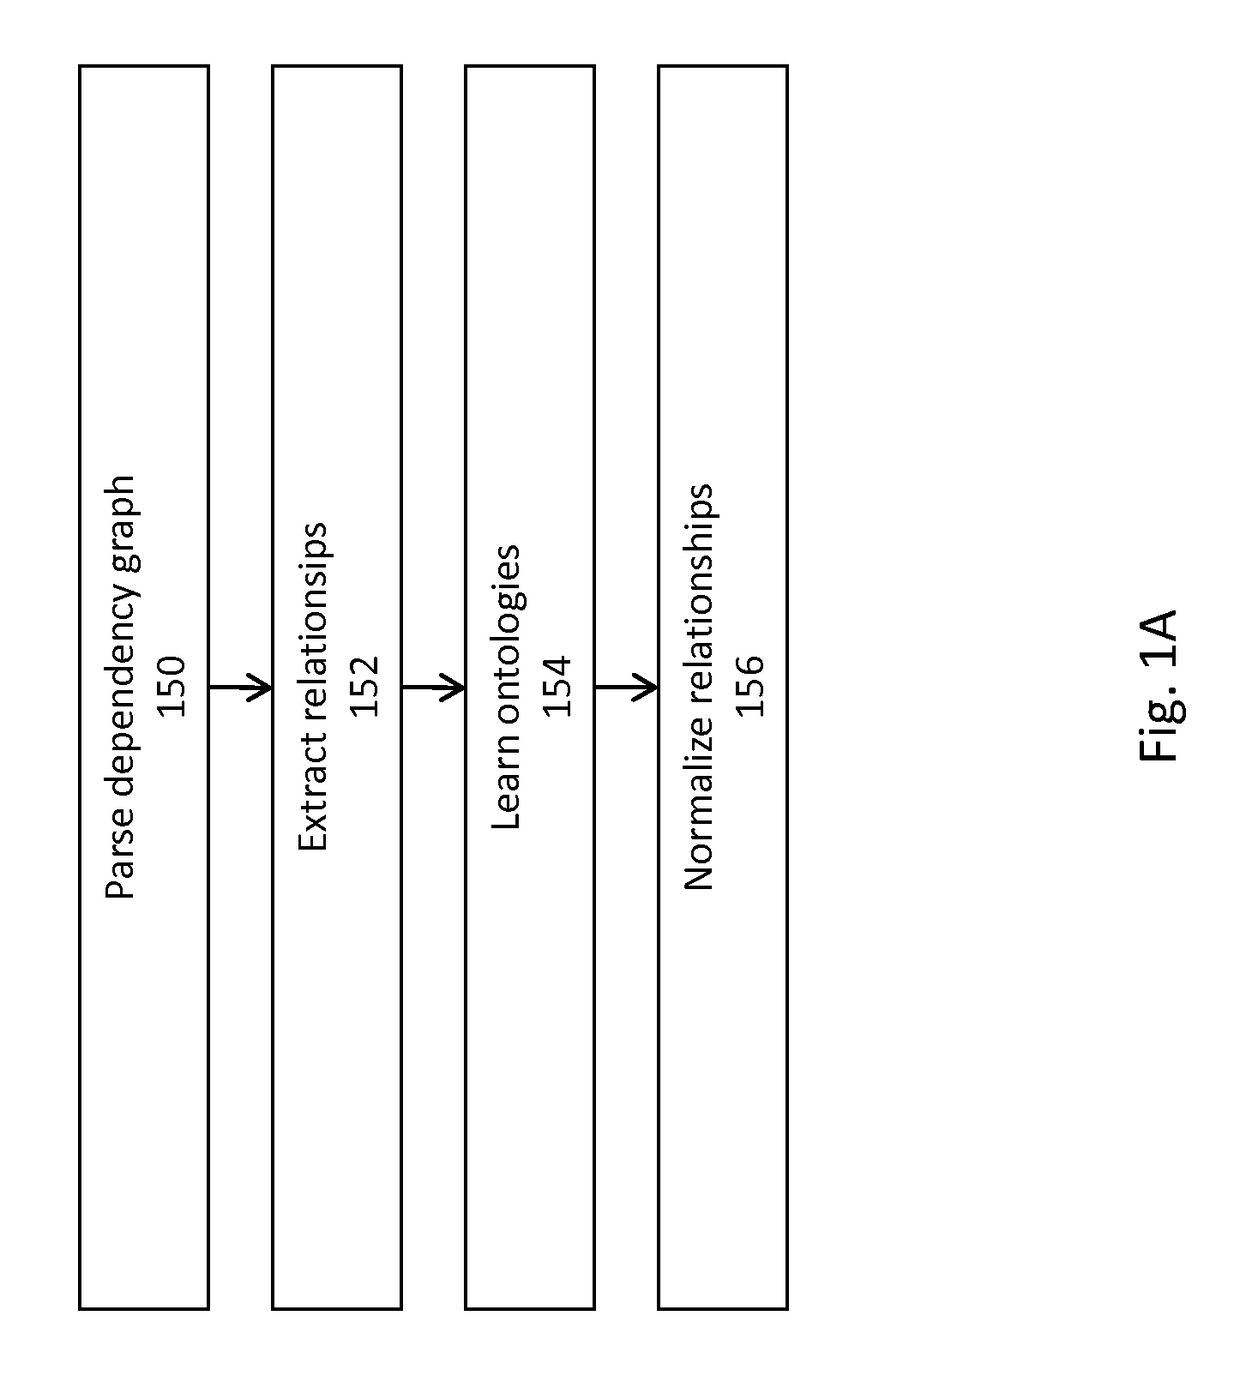 Method and system for extraction and normalization of relationships via ontology induction